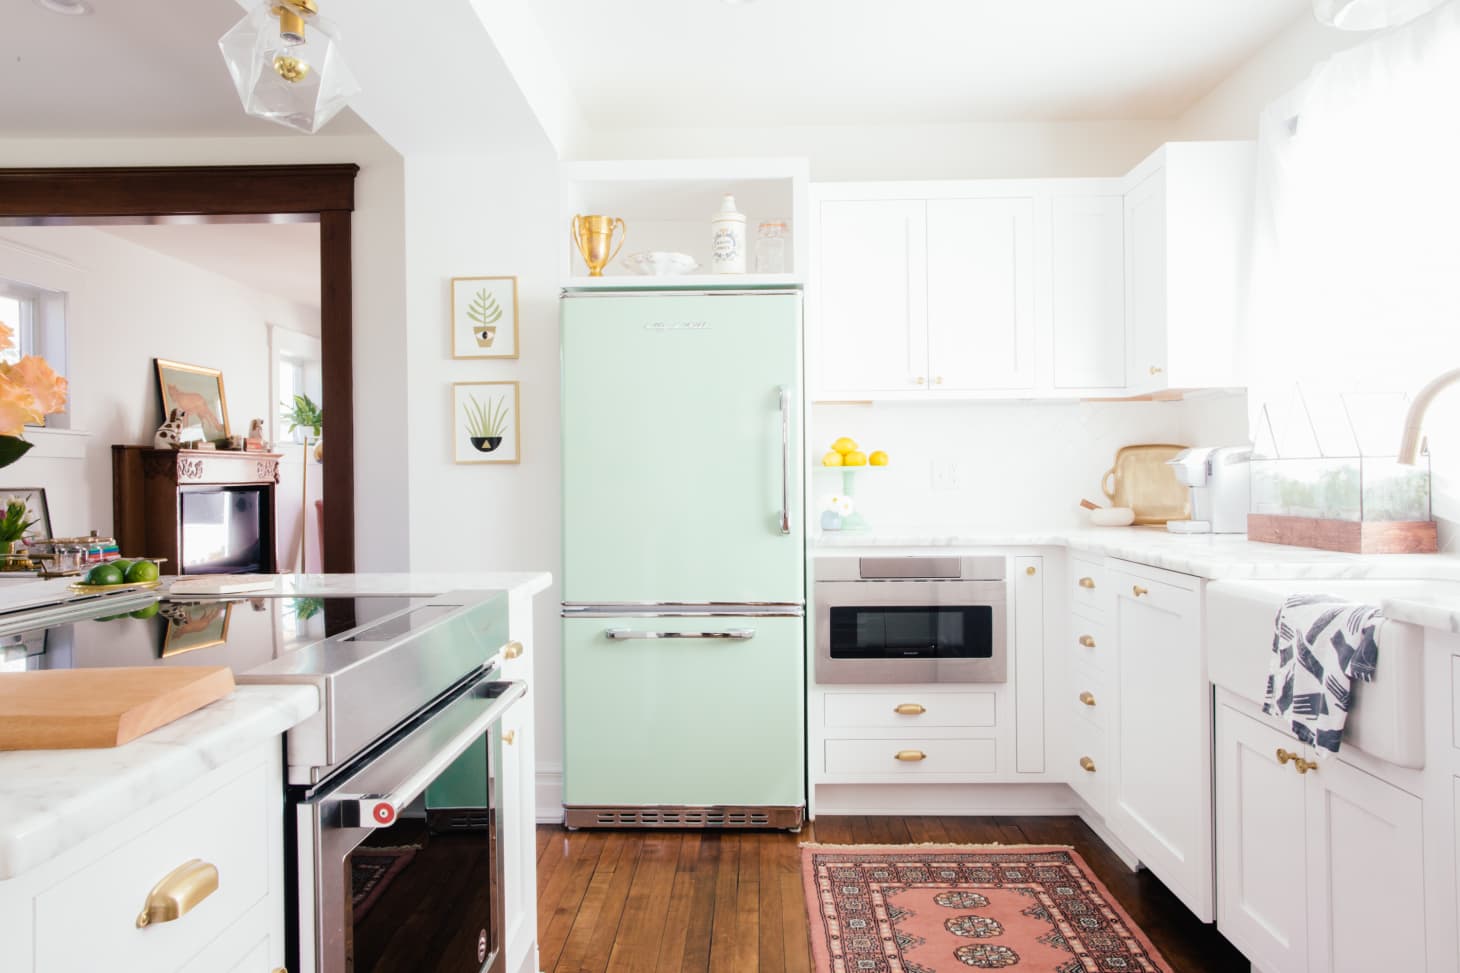 kitchen decorating idea with mint green wall